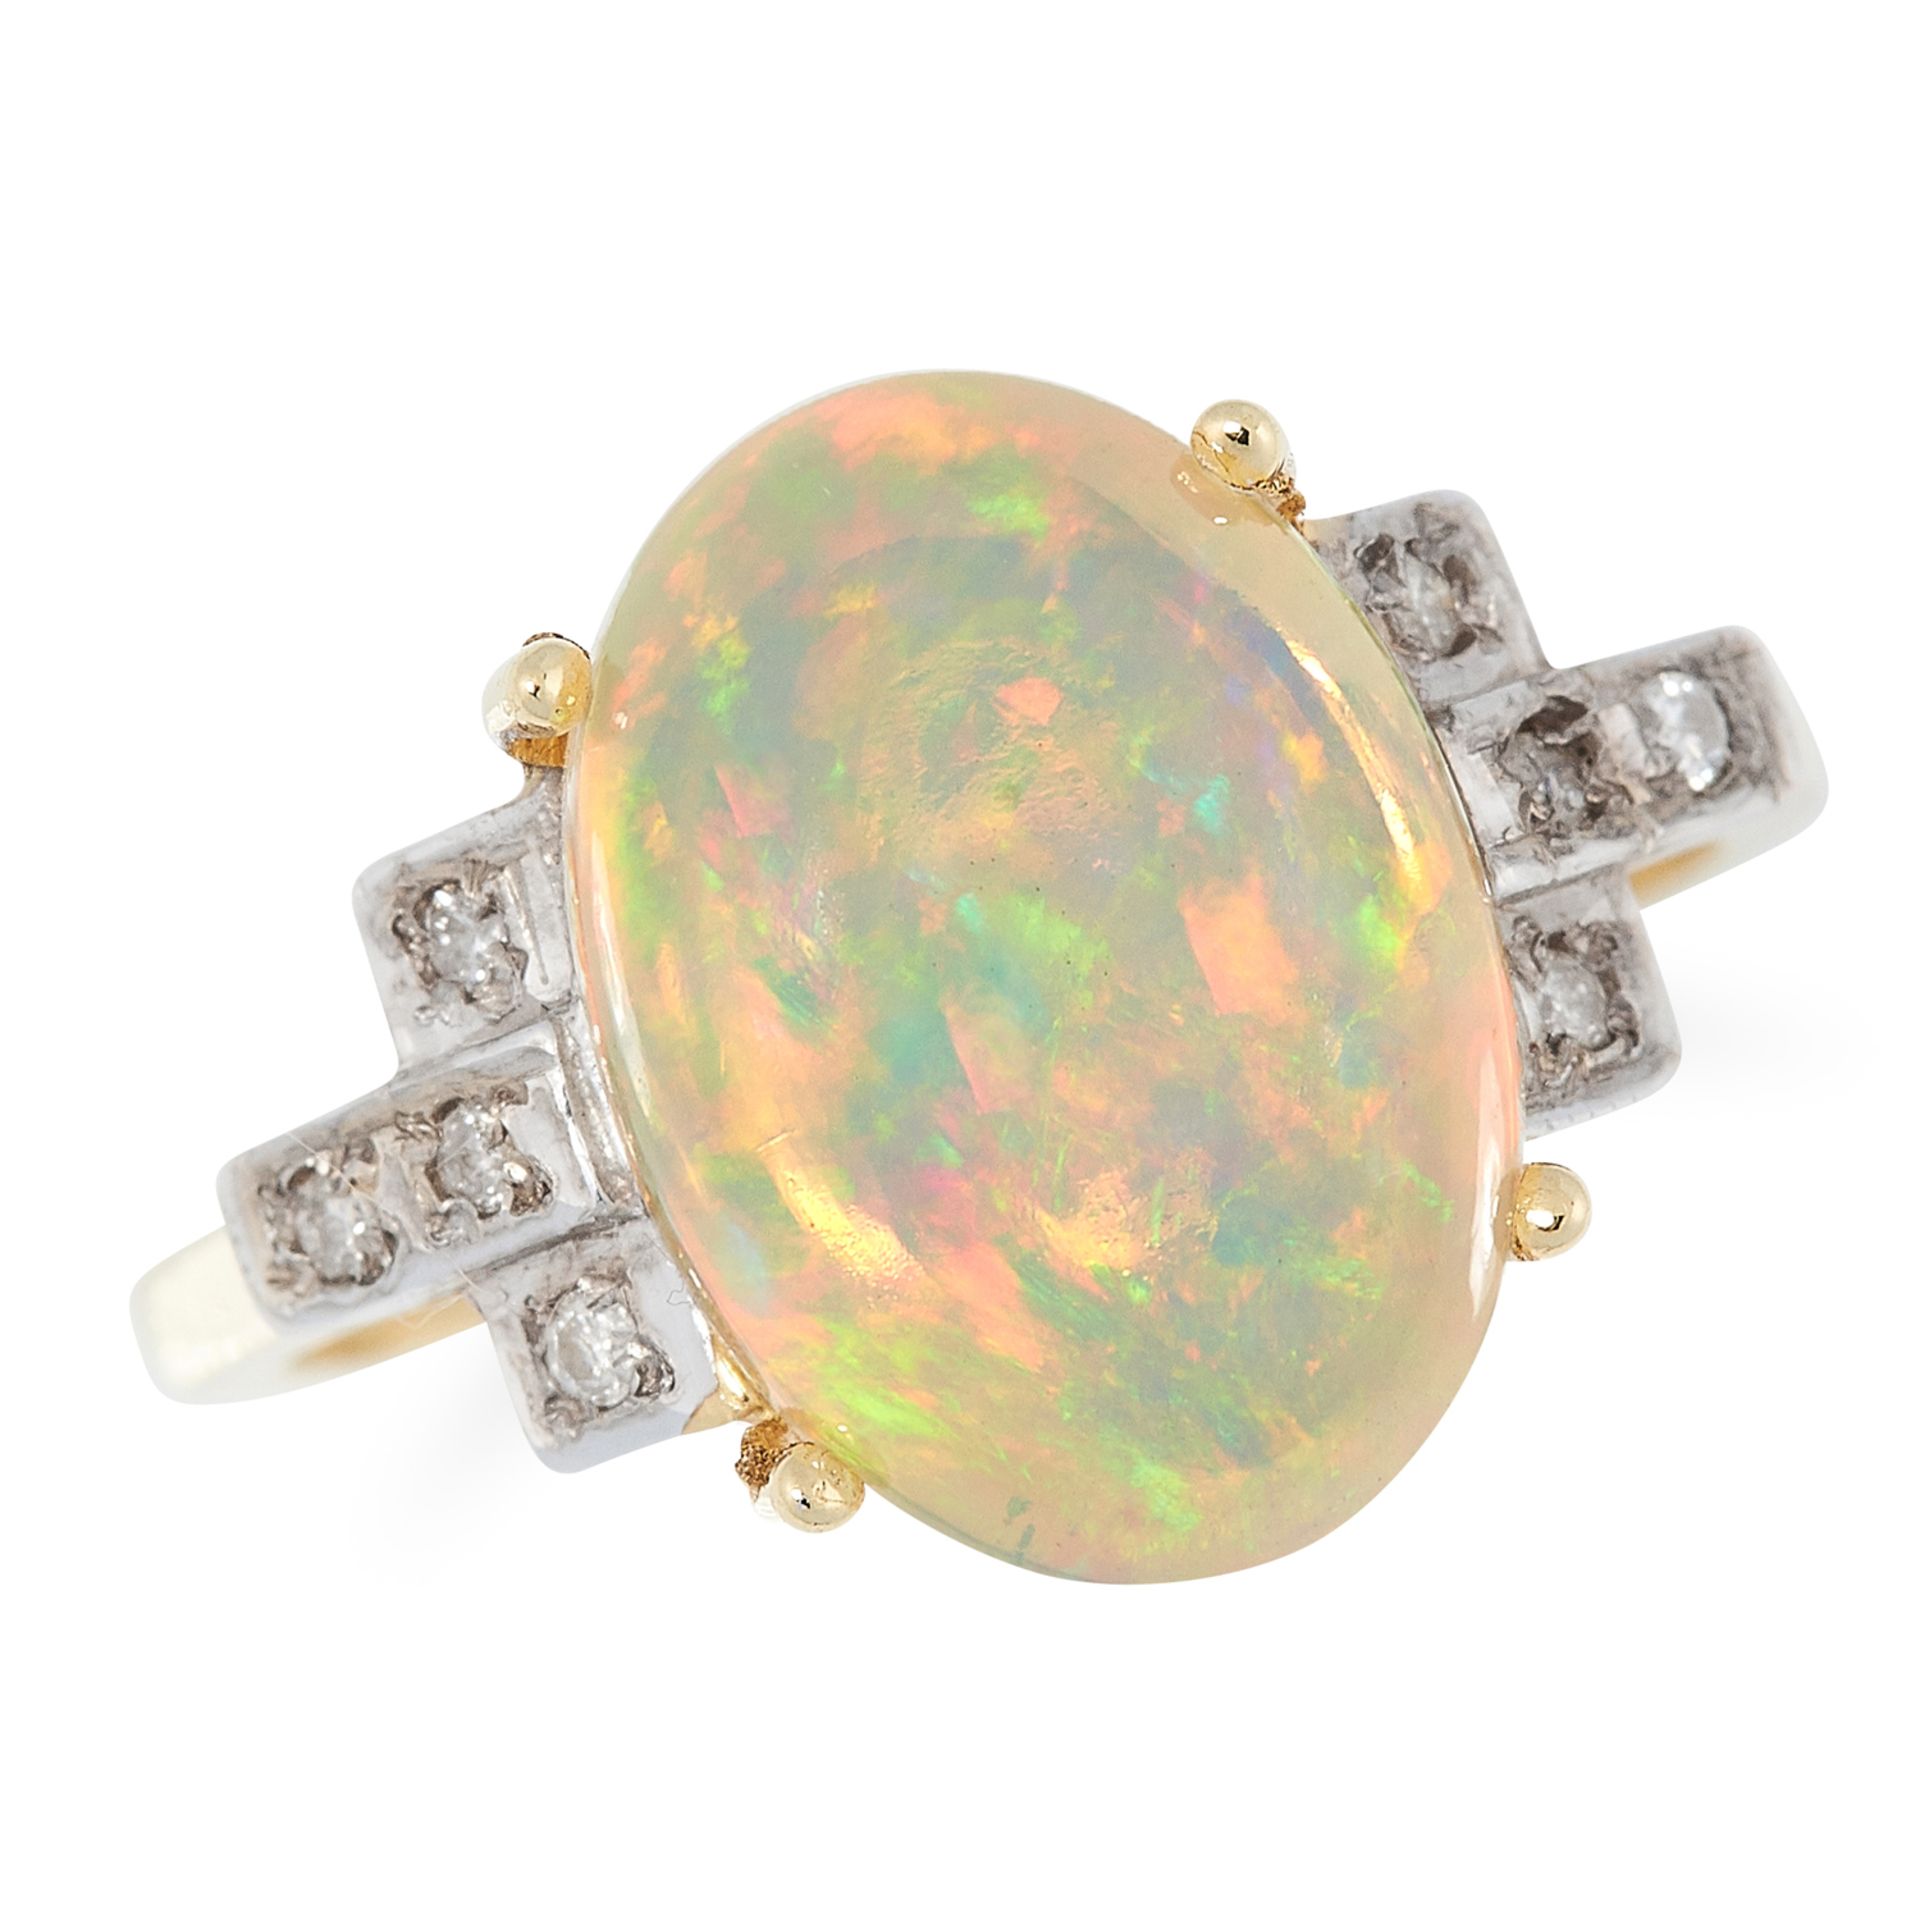 AN OPAL AND DIAMOND DRESS RING set with a cabochon opal between round cut diamonds, British